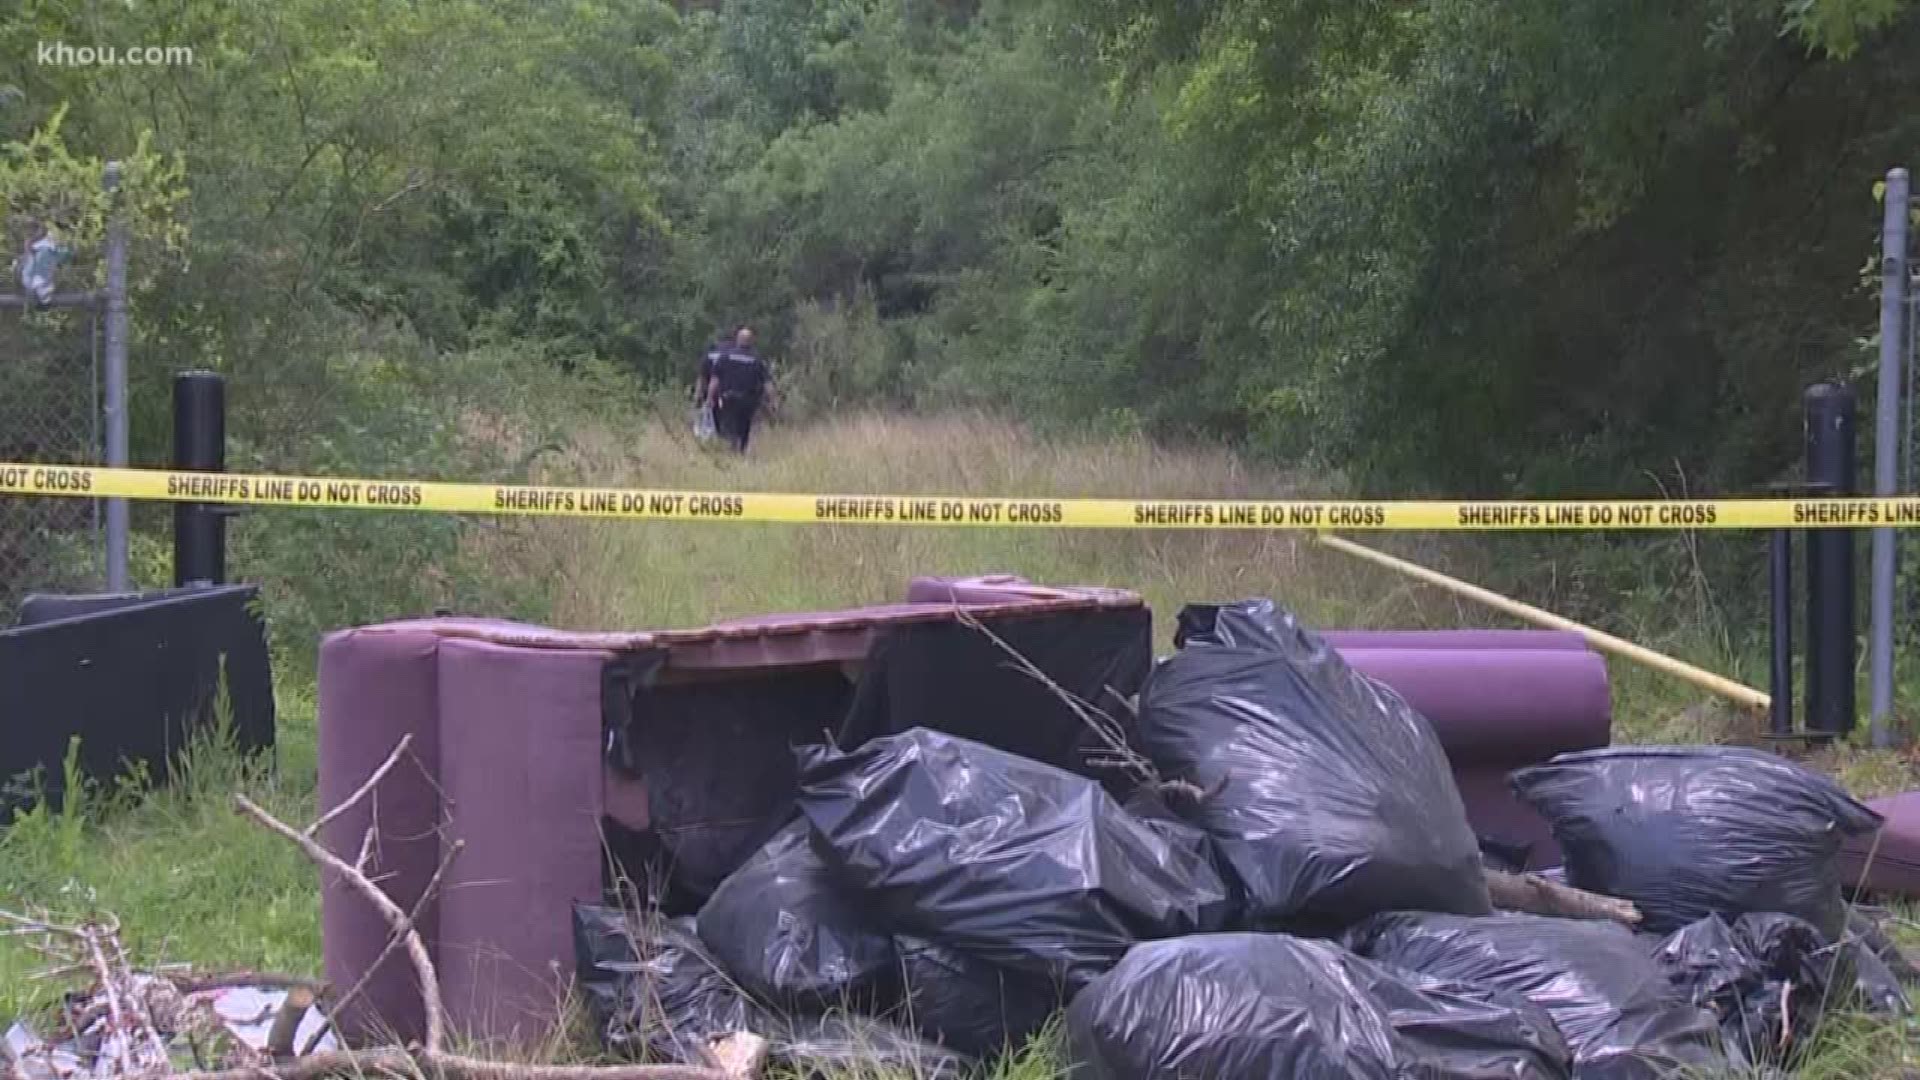 Human remains were found scattered in a wooded area in northeast Harris County. The bones are badly decomposed and it's not clear how long they have been there.